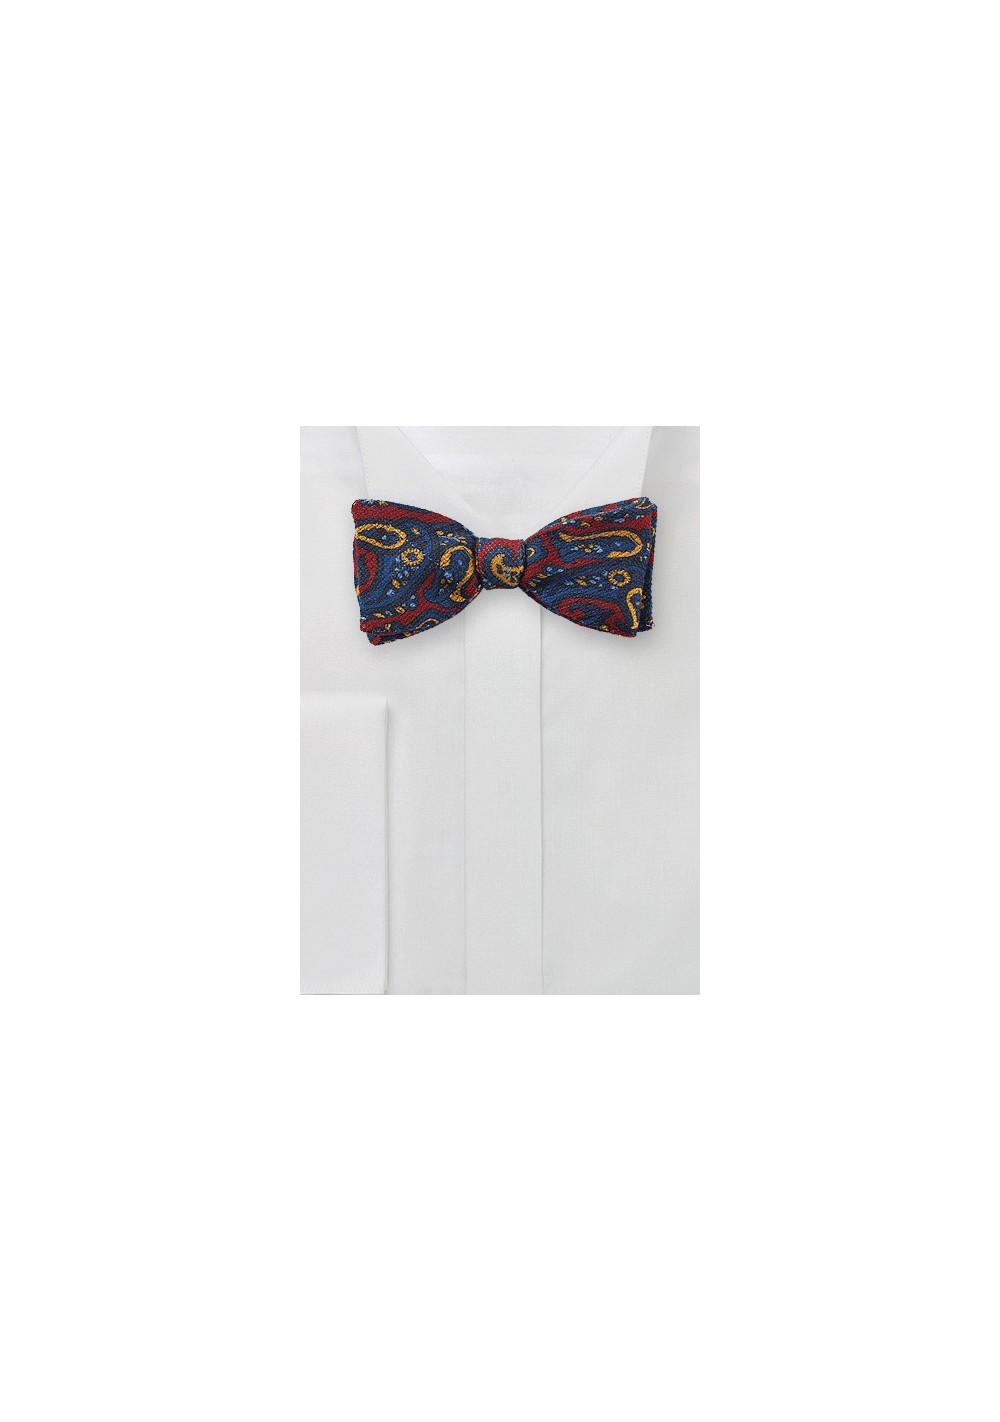 Wool Paisley Print Bow Tie in Red and Blue